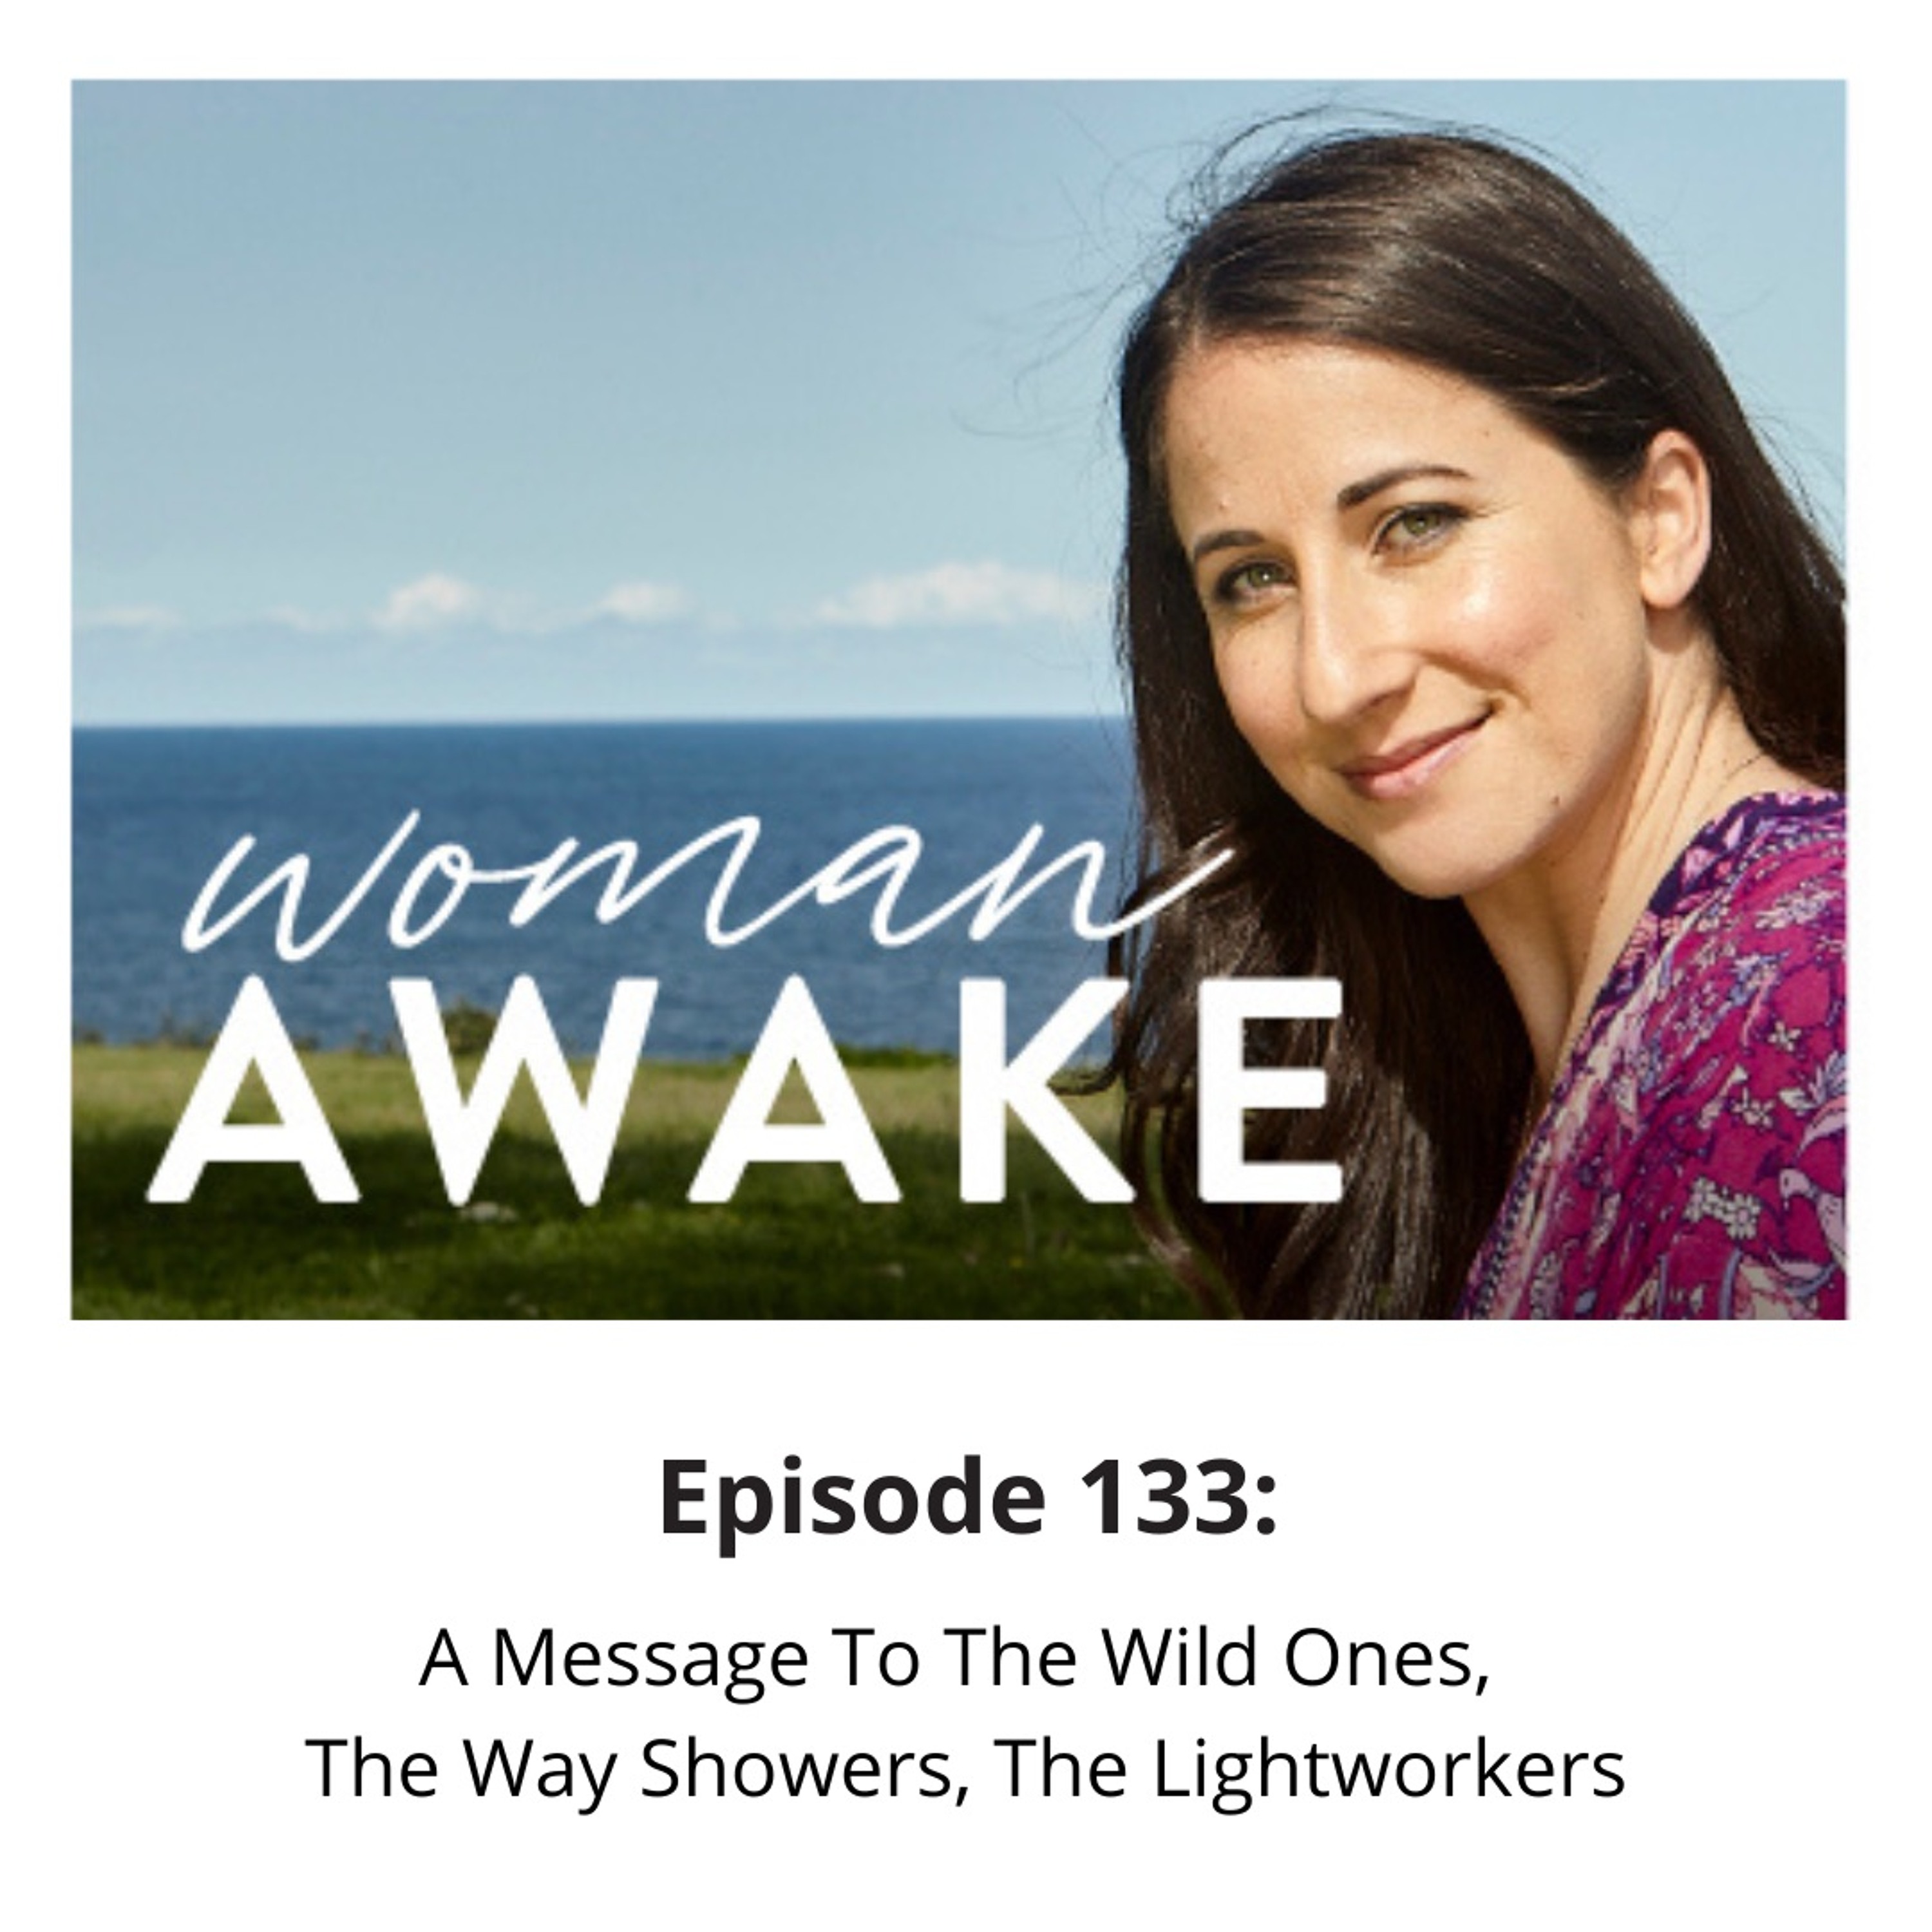 Woman Awake Episode 133 - A Message To The Wild Ones, The Way Showers, The Lightworkers